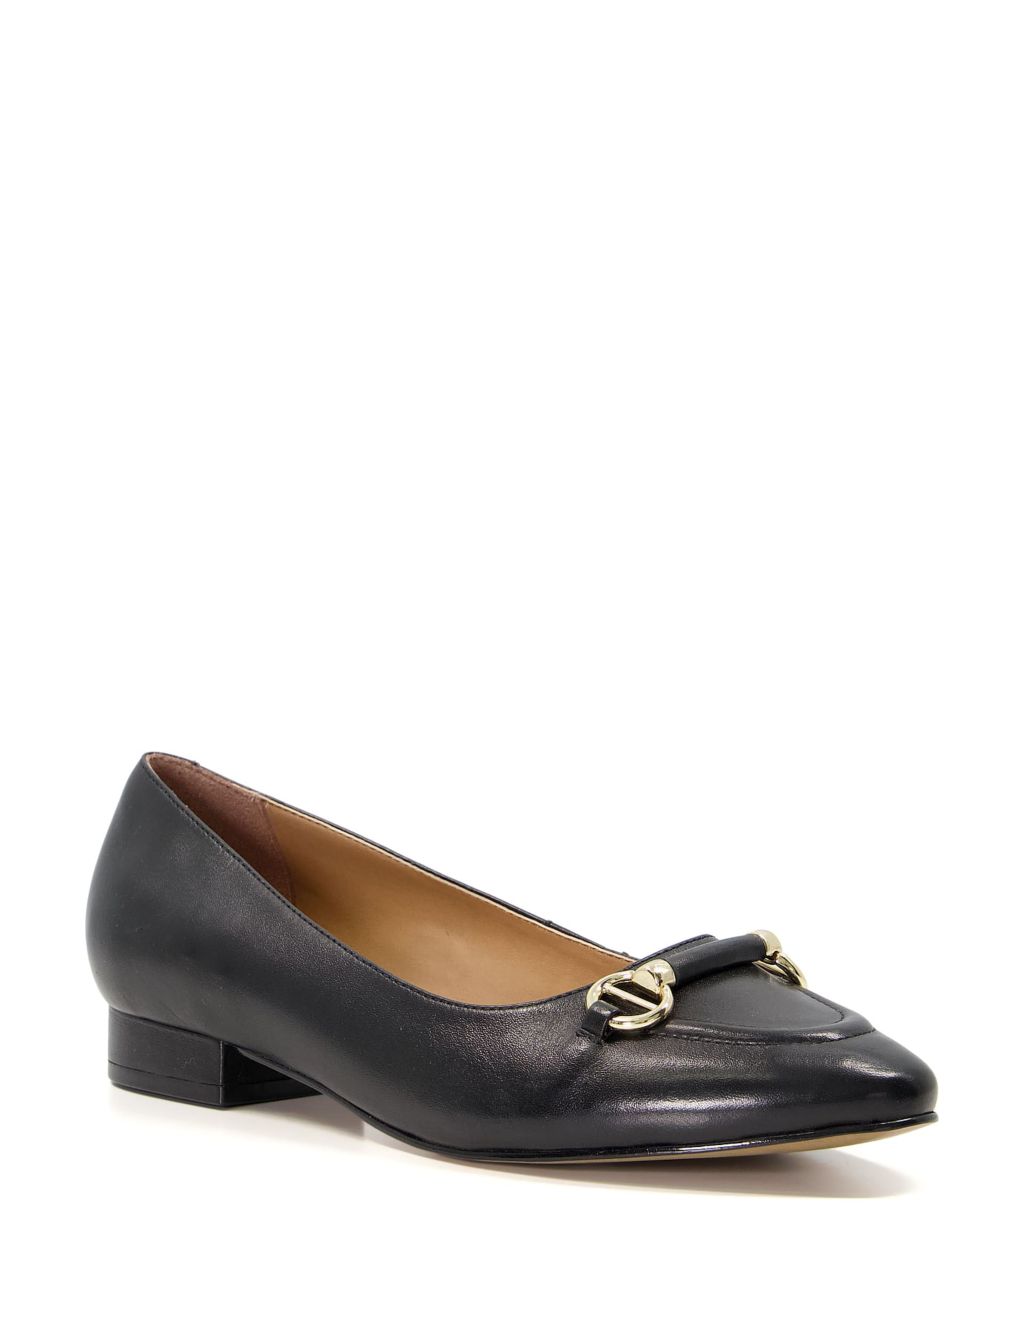 Leather Buckle Flat Pumps image 1